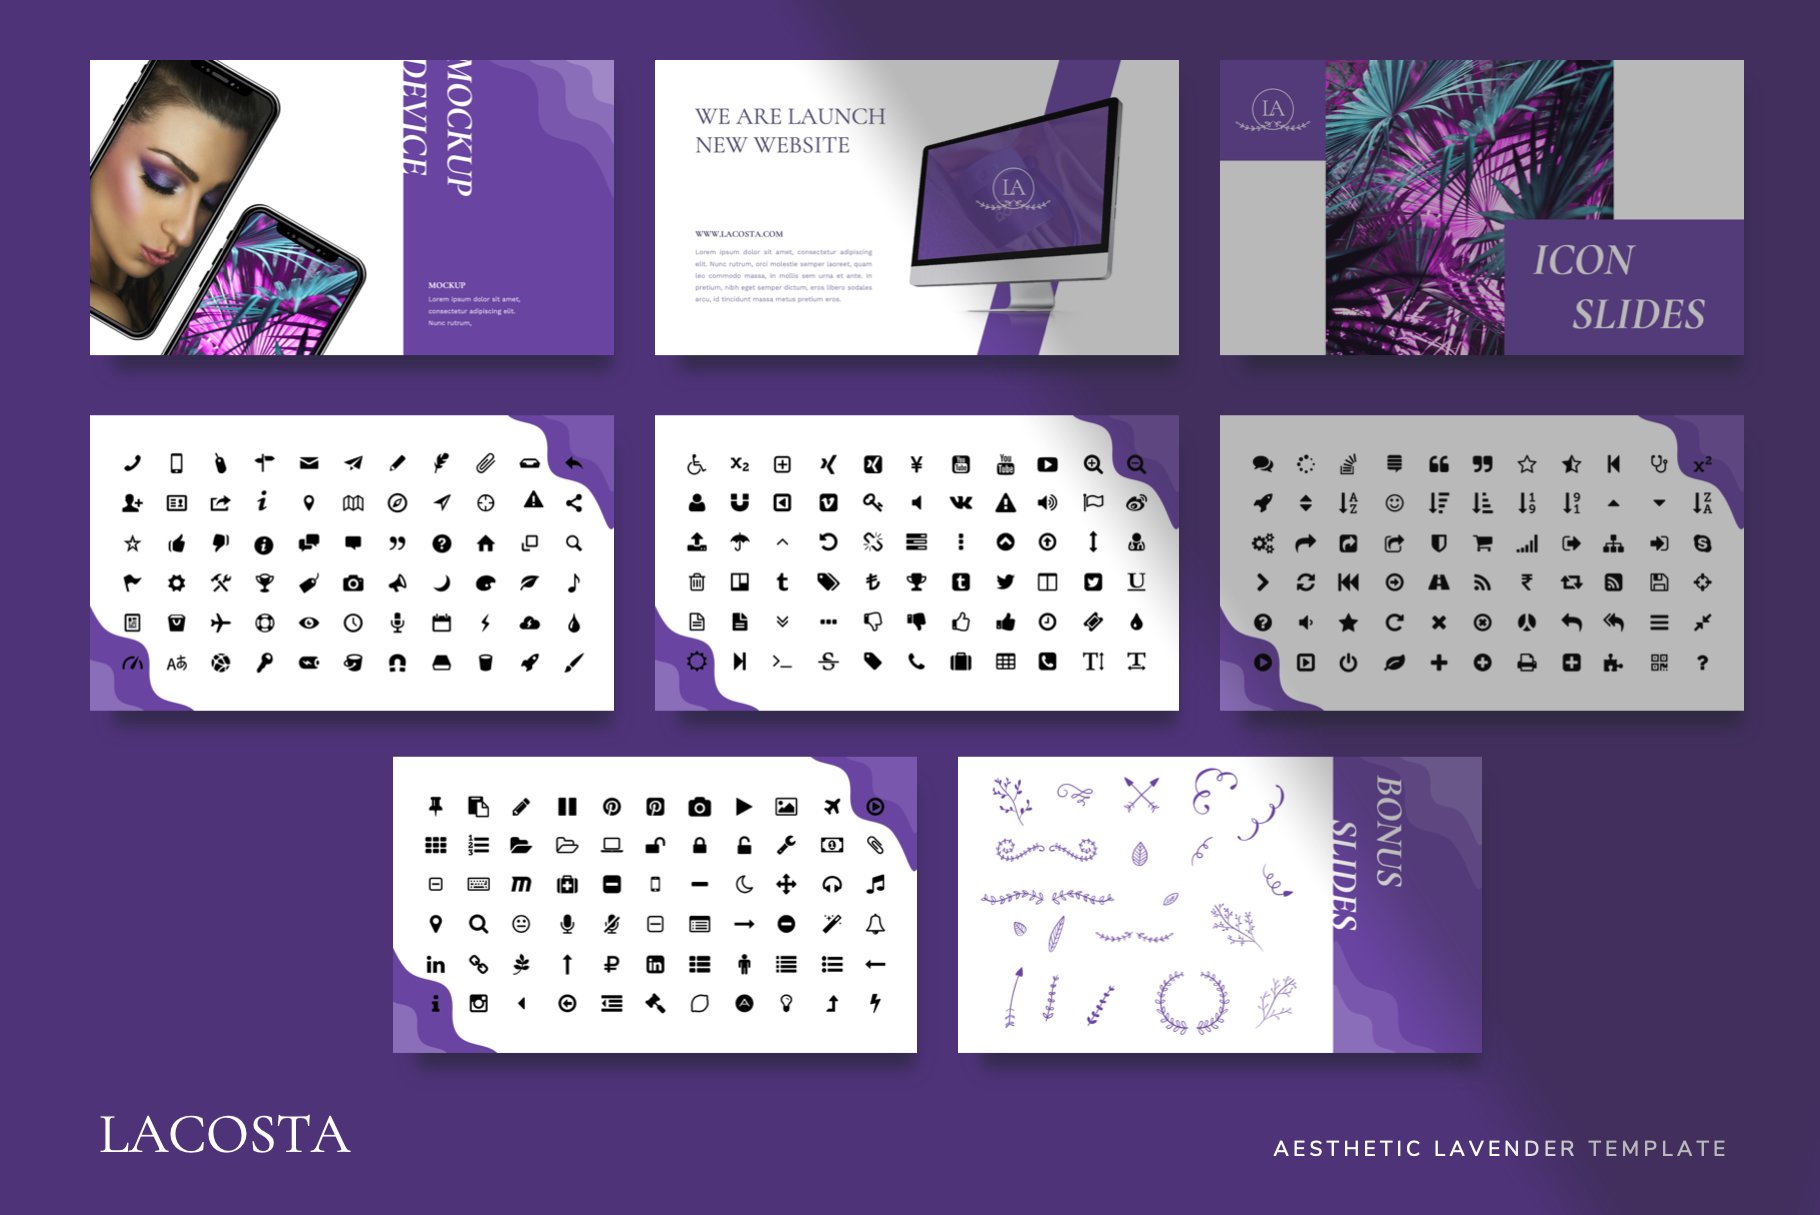 LACOSTA includes own icons for decorate presentation.